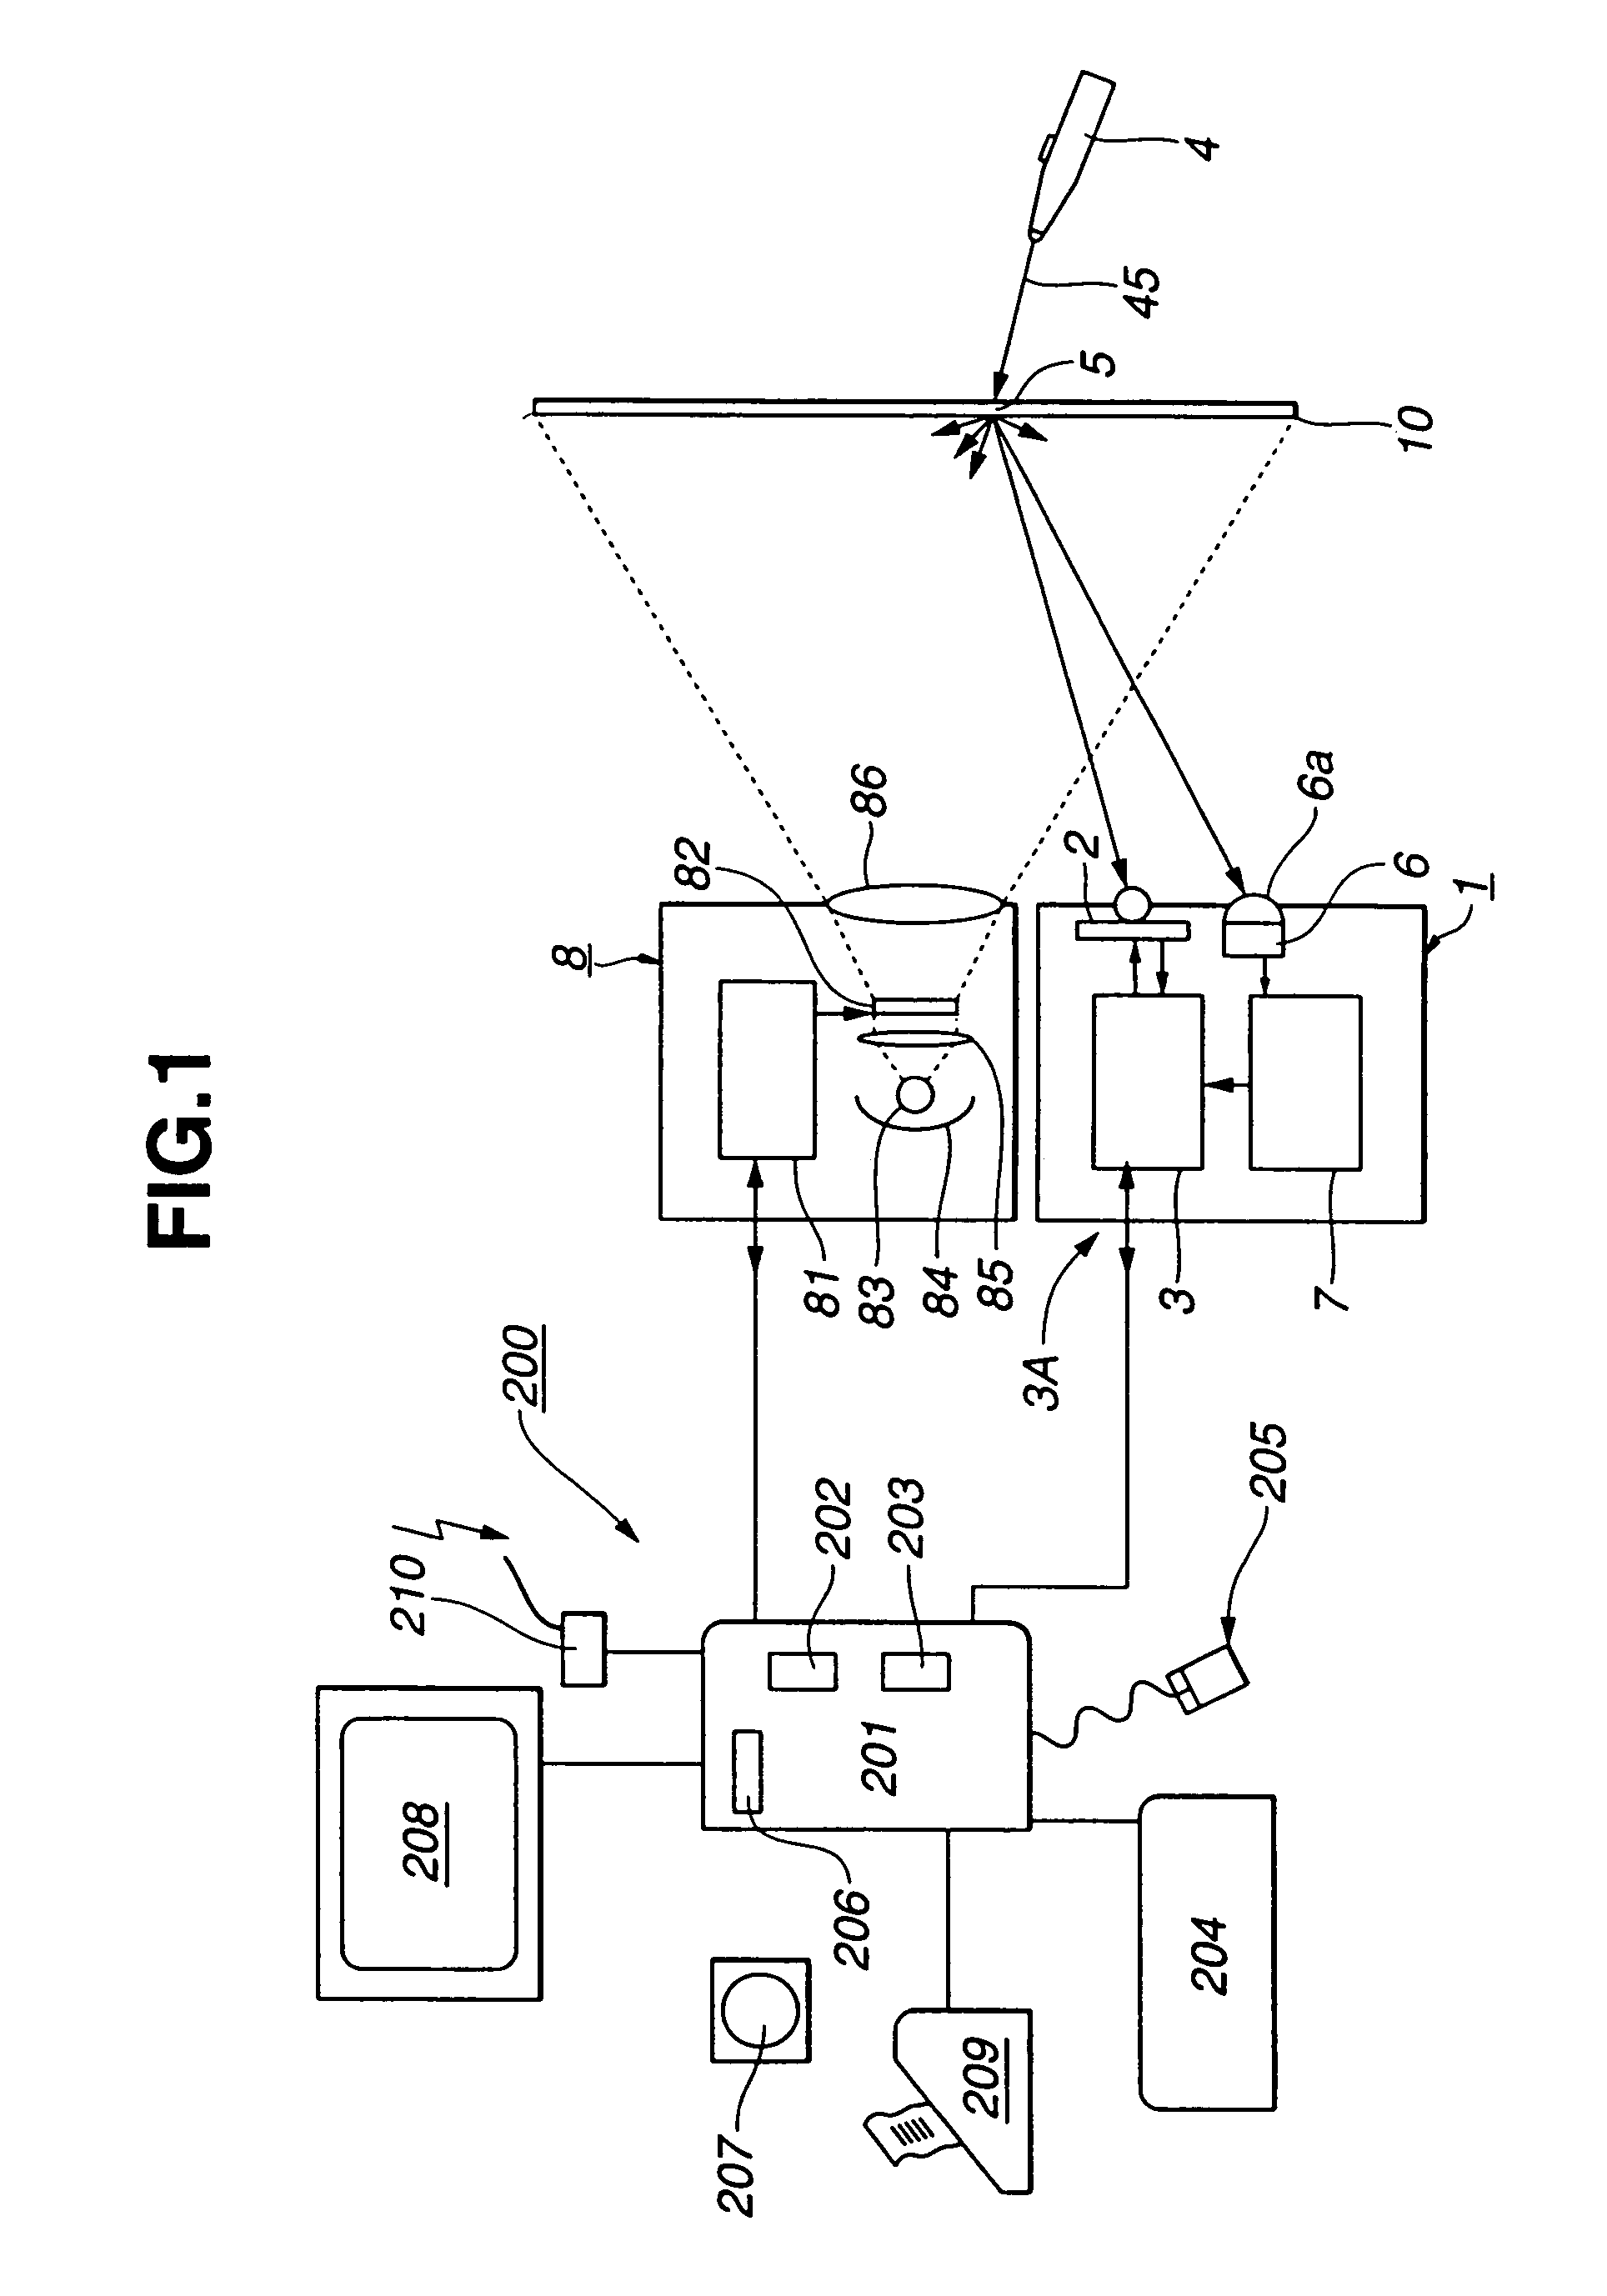 Position information input apparatus and method